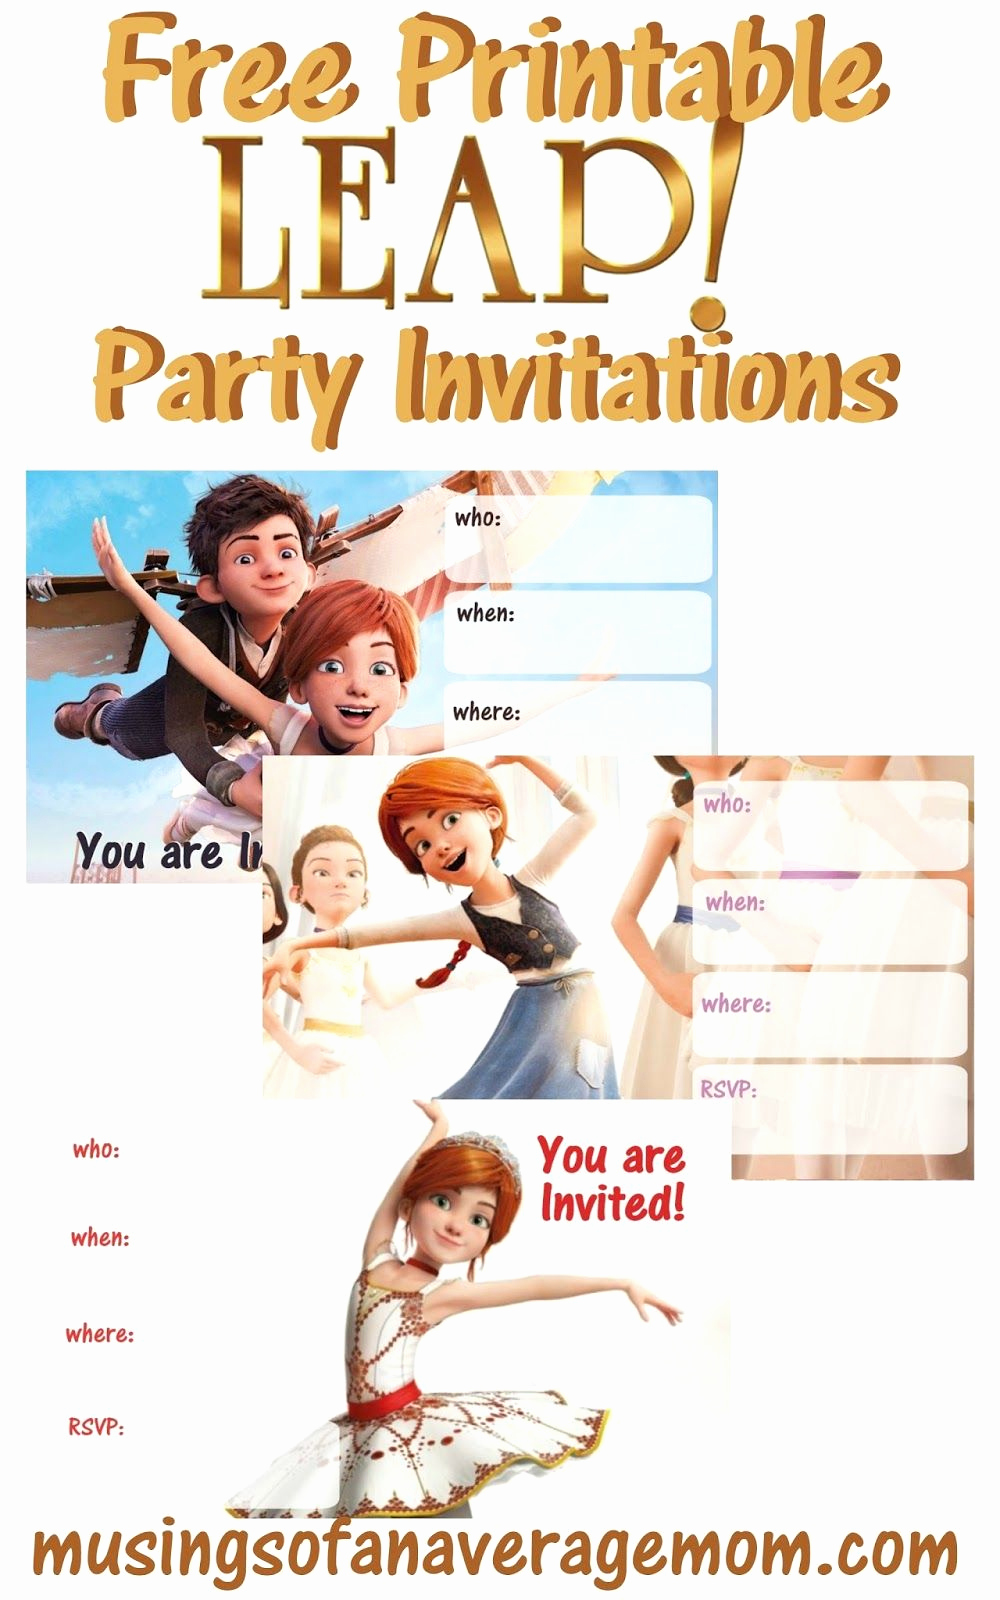 Leap Year Birthday Invitation Luxury Leap Party Invitations Leap Party